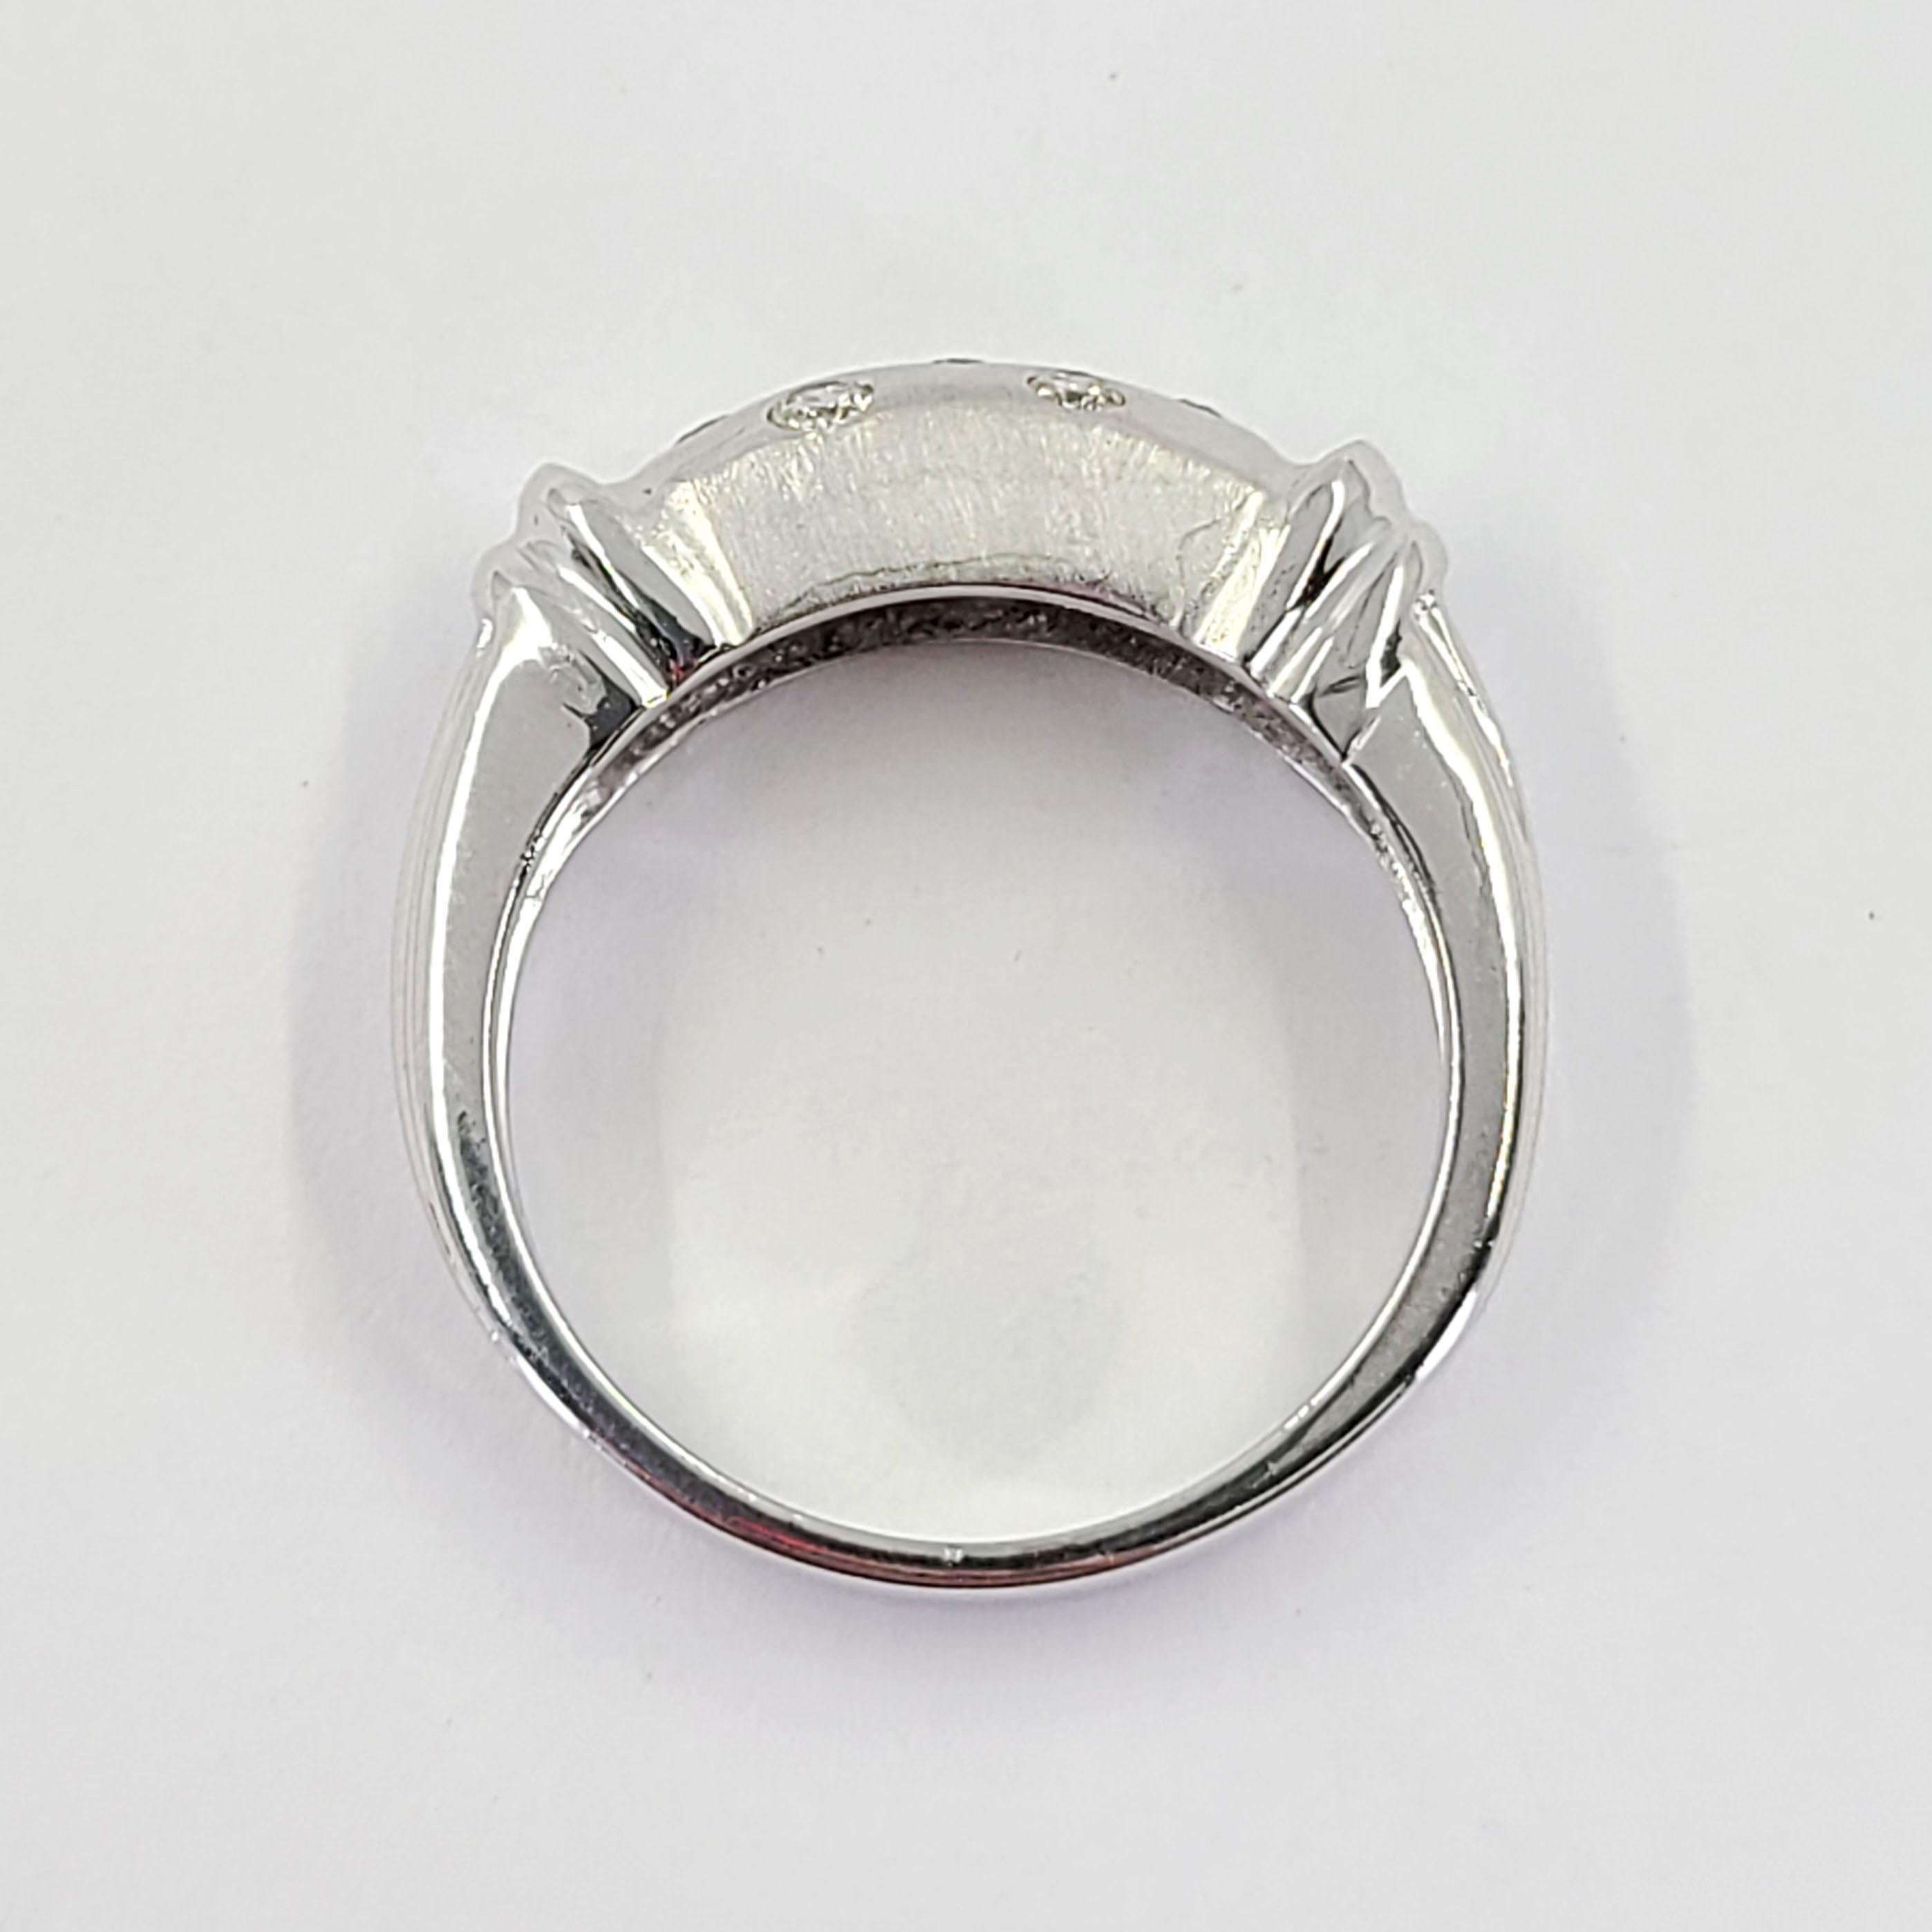 Satin Finish White Gold Diamond Band In Good Condition For Sale In Coral Gables, FL